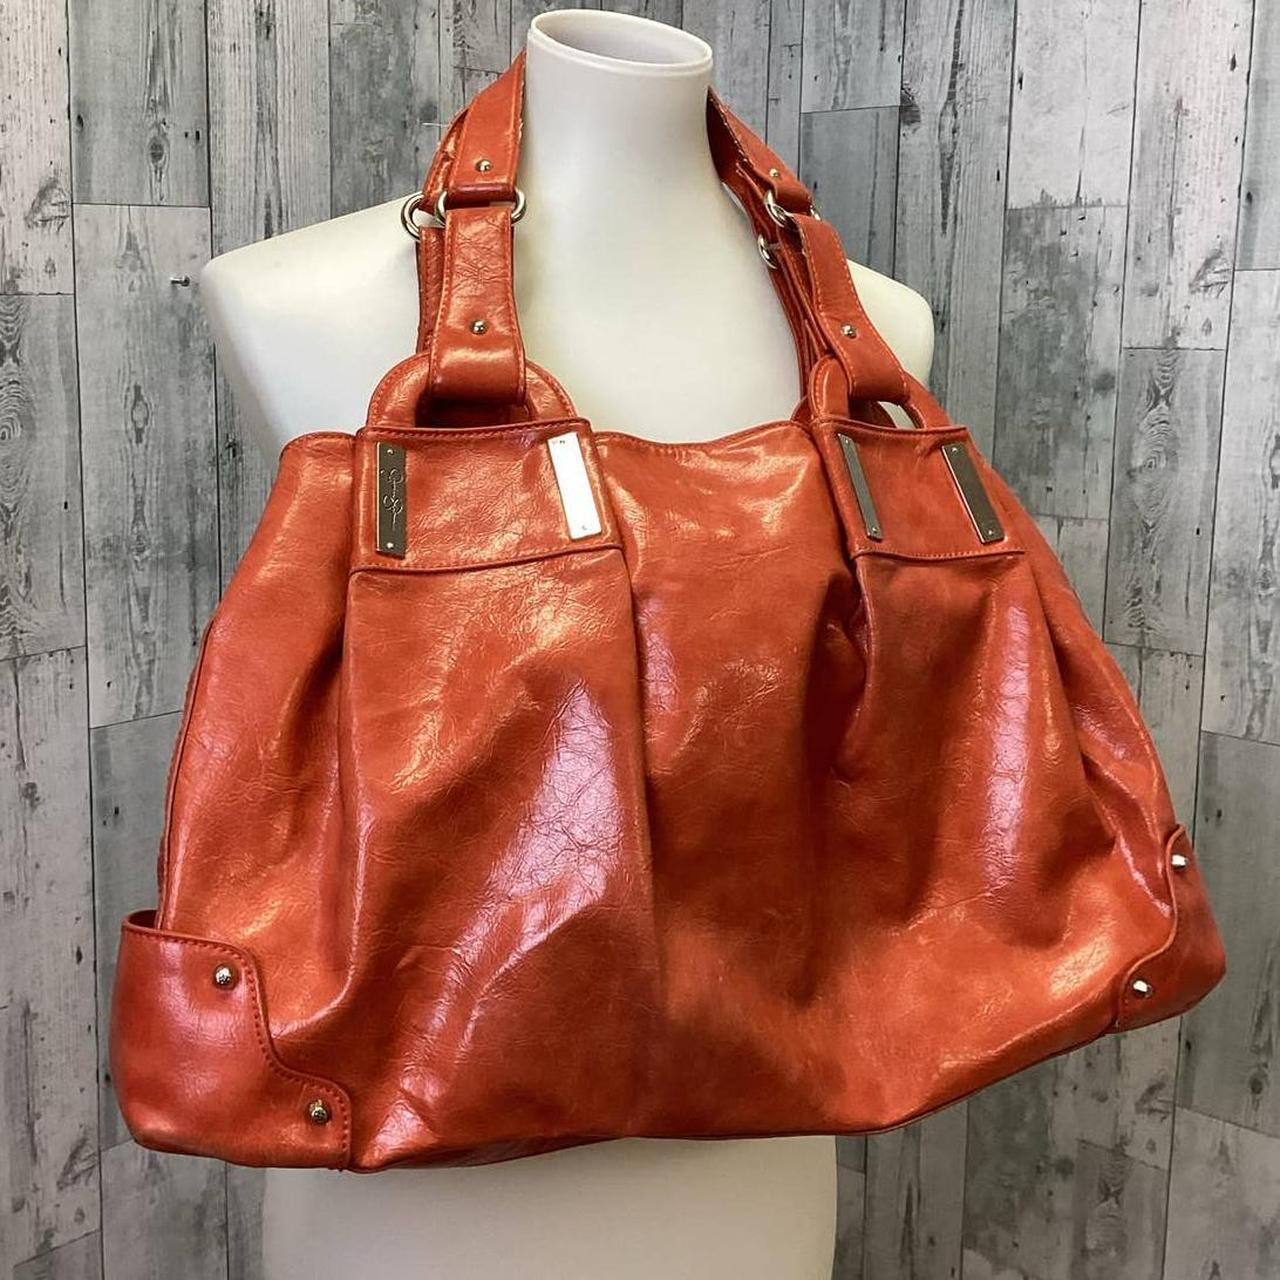 Jessica Simpson | Bags | Red Patent Leather Purse | Poshmark